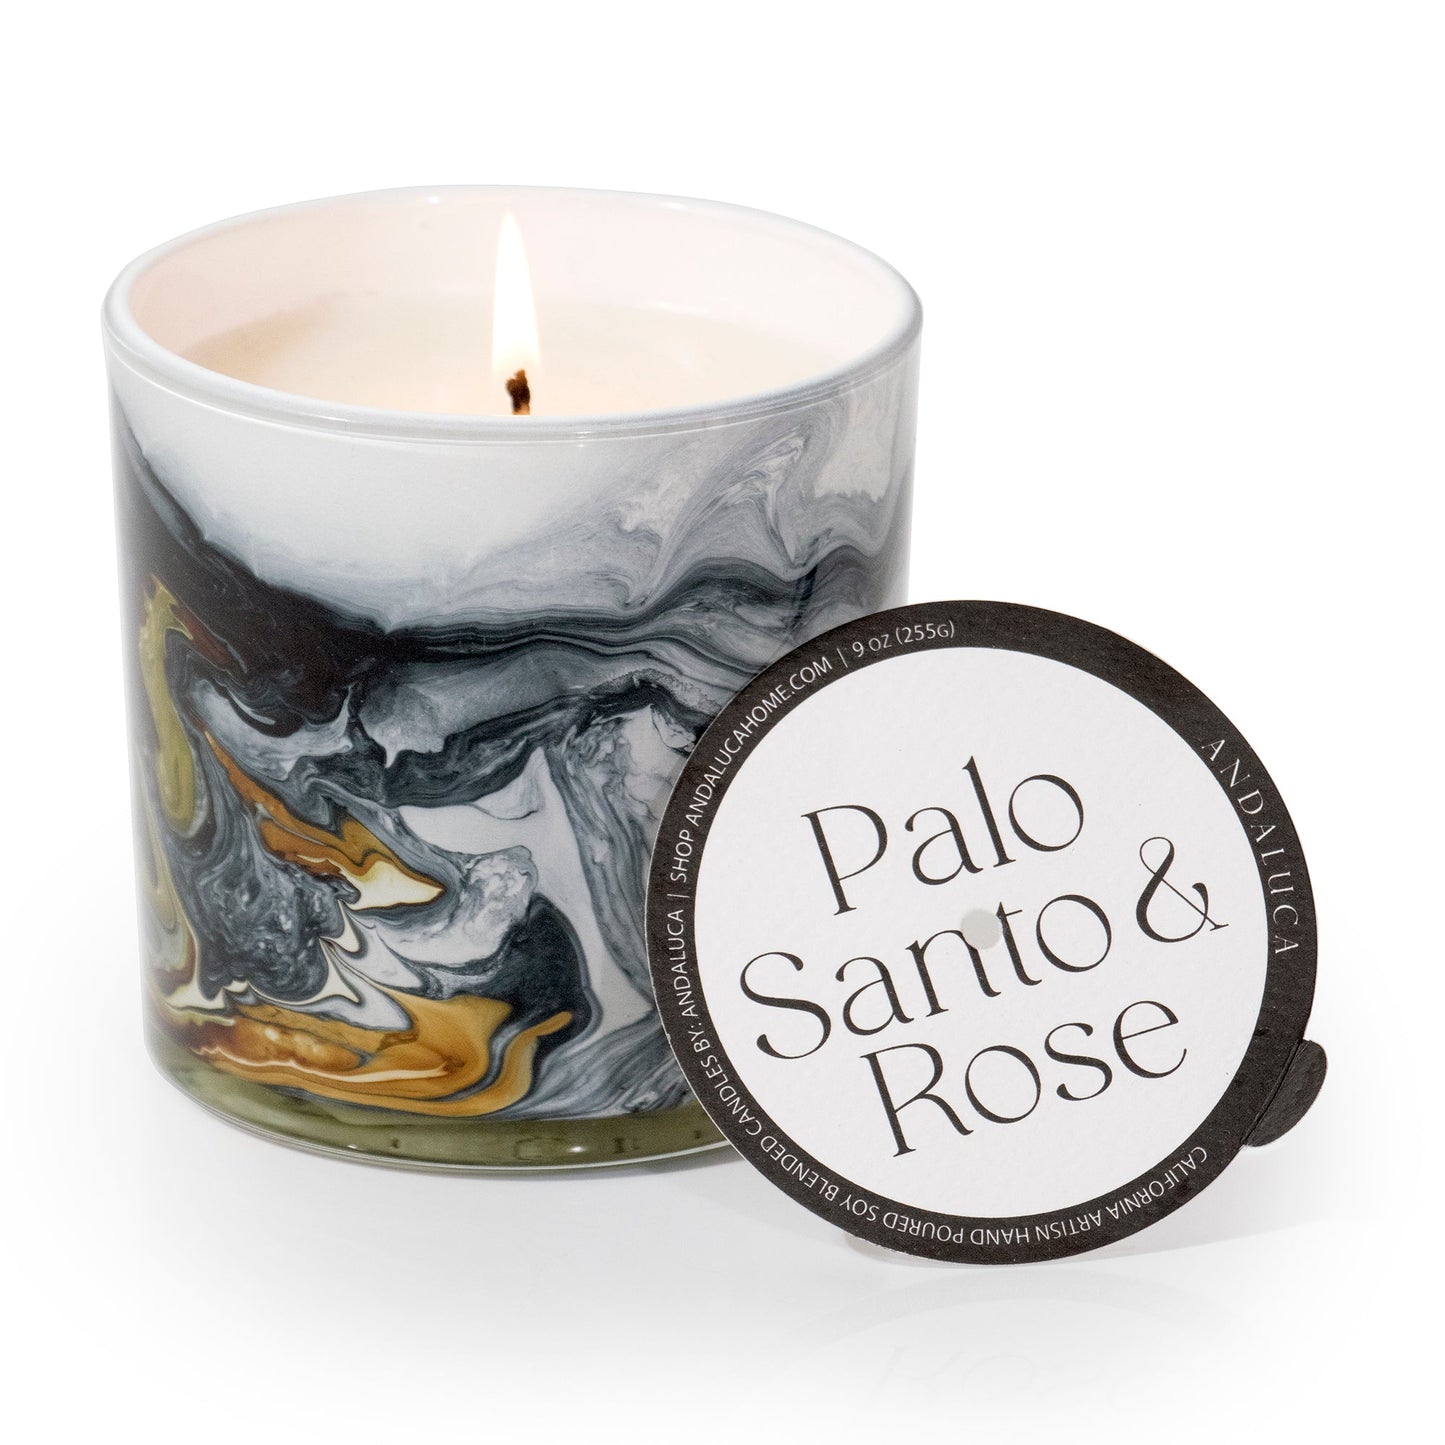 Palo Santo & Rose 14 oz. Swirl Glass Candle by Andaluca Home